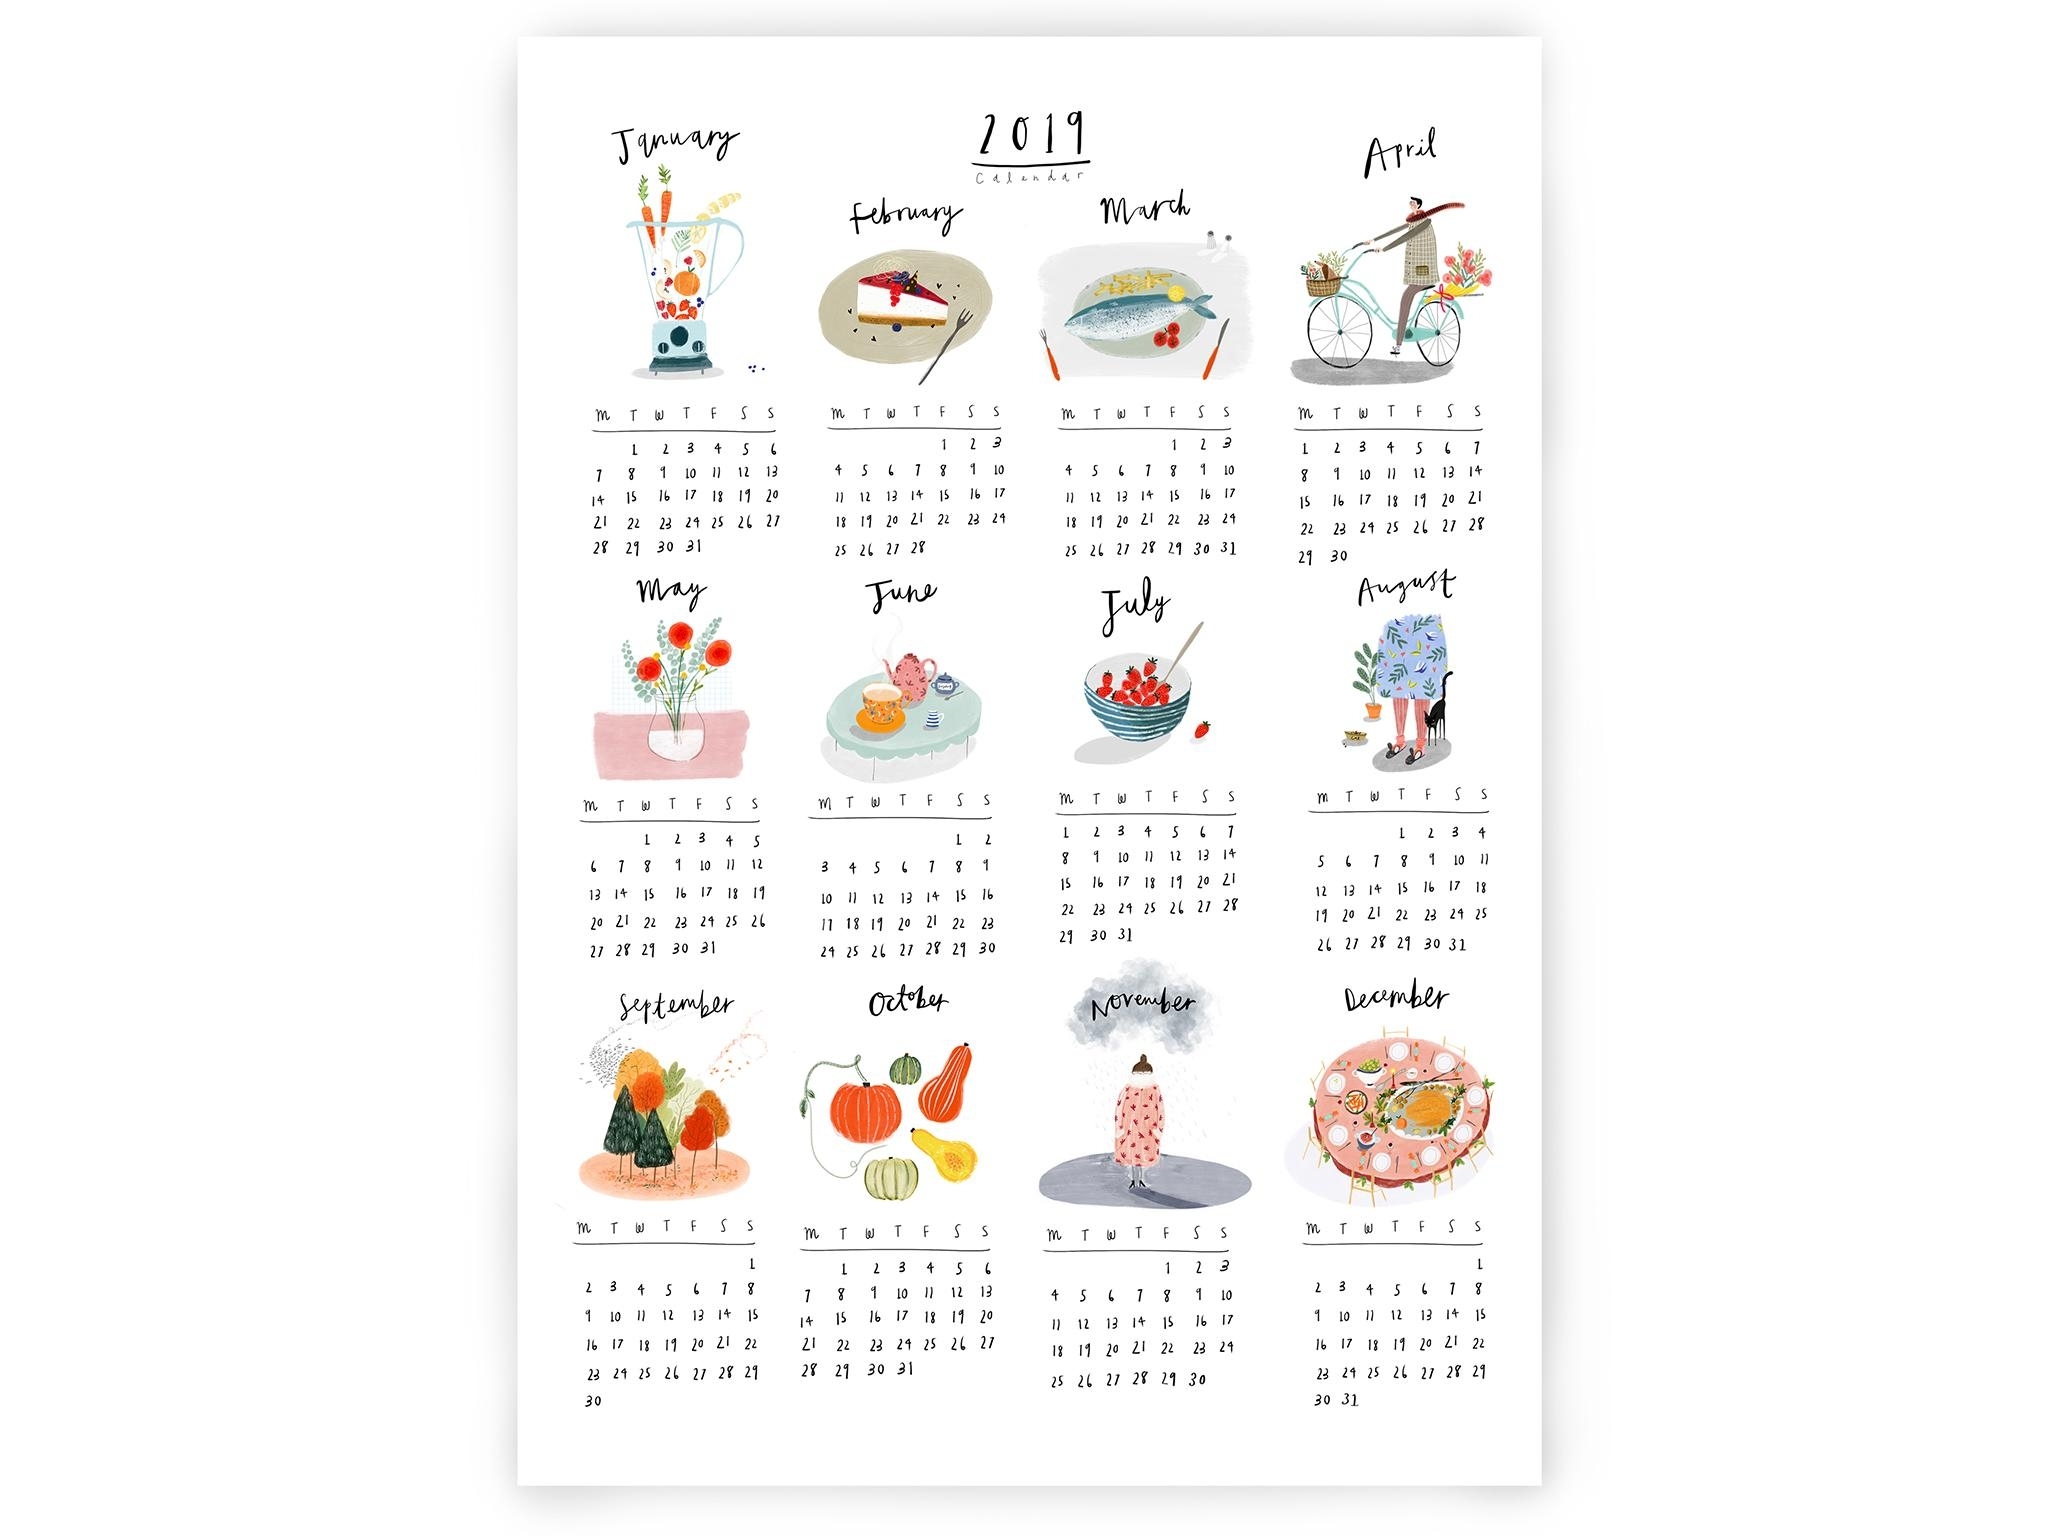 26 Best Calendars And Wall Planners For 2019 | The Independent